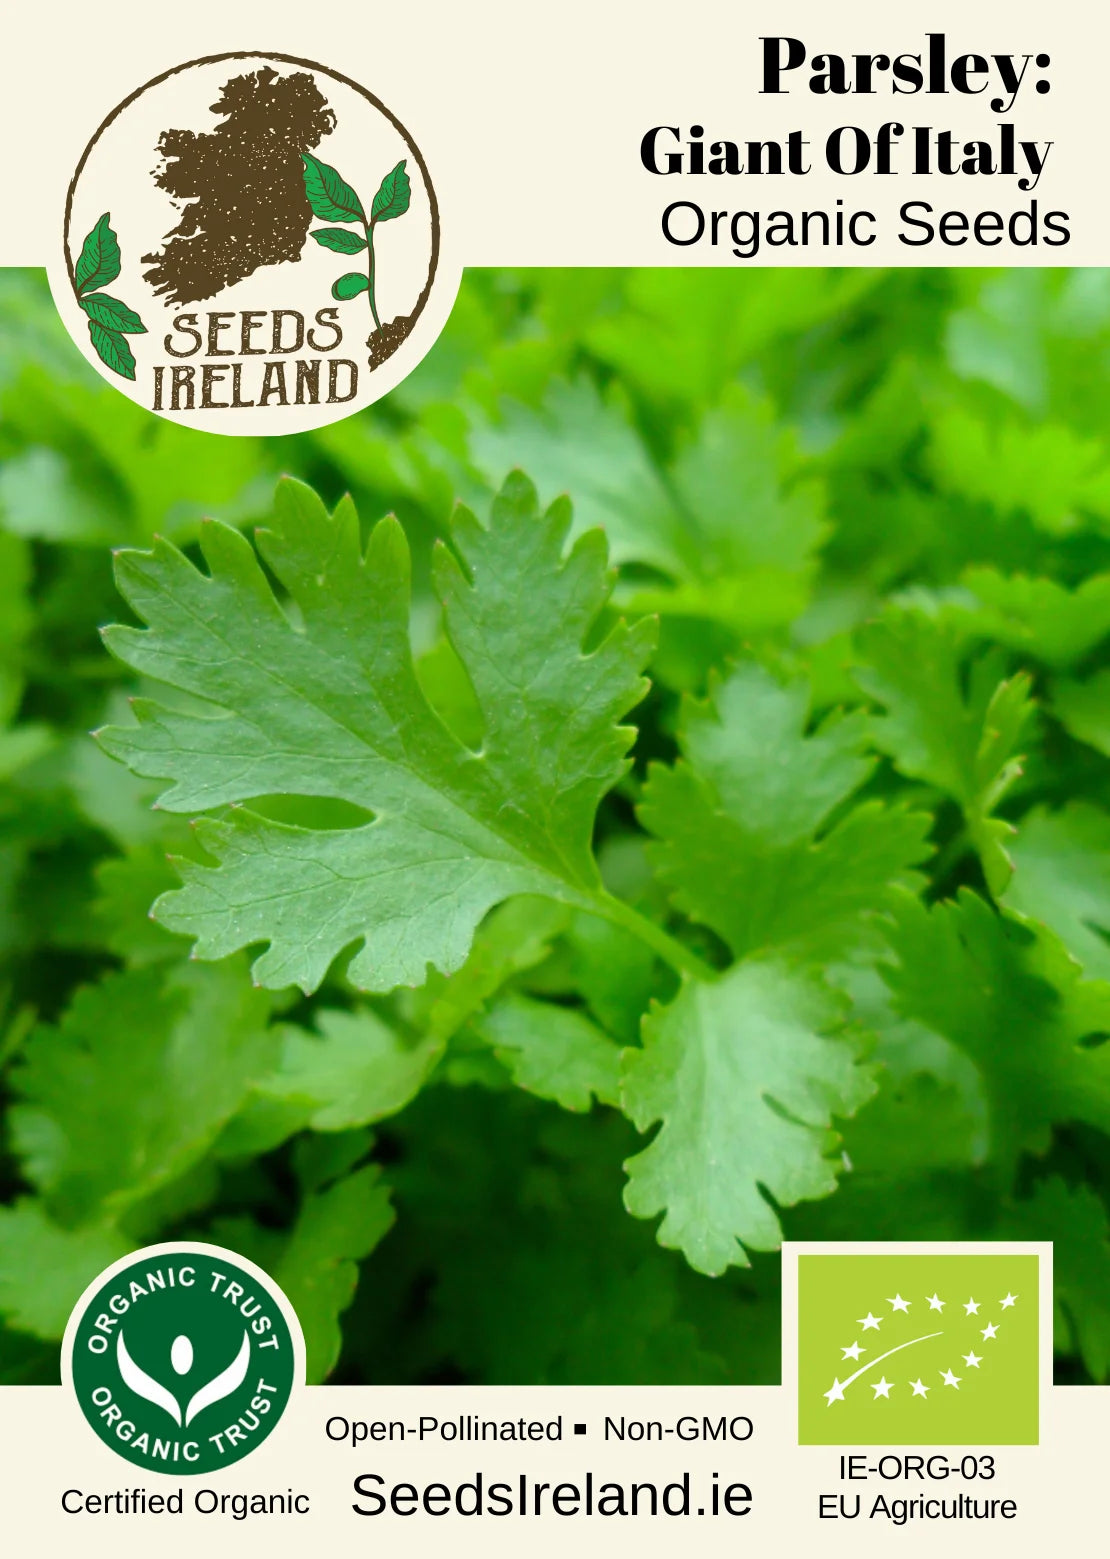 Parsley: Giant Of Italy Organic Seed